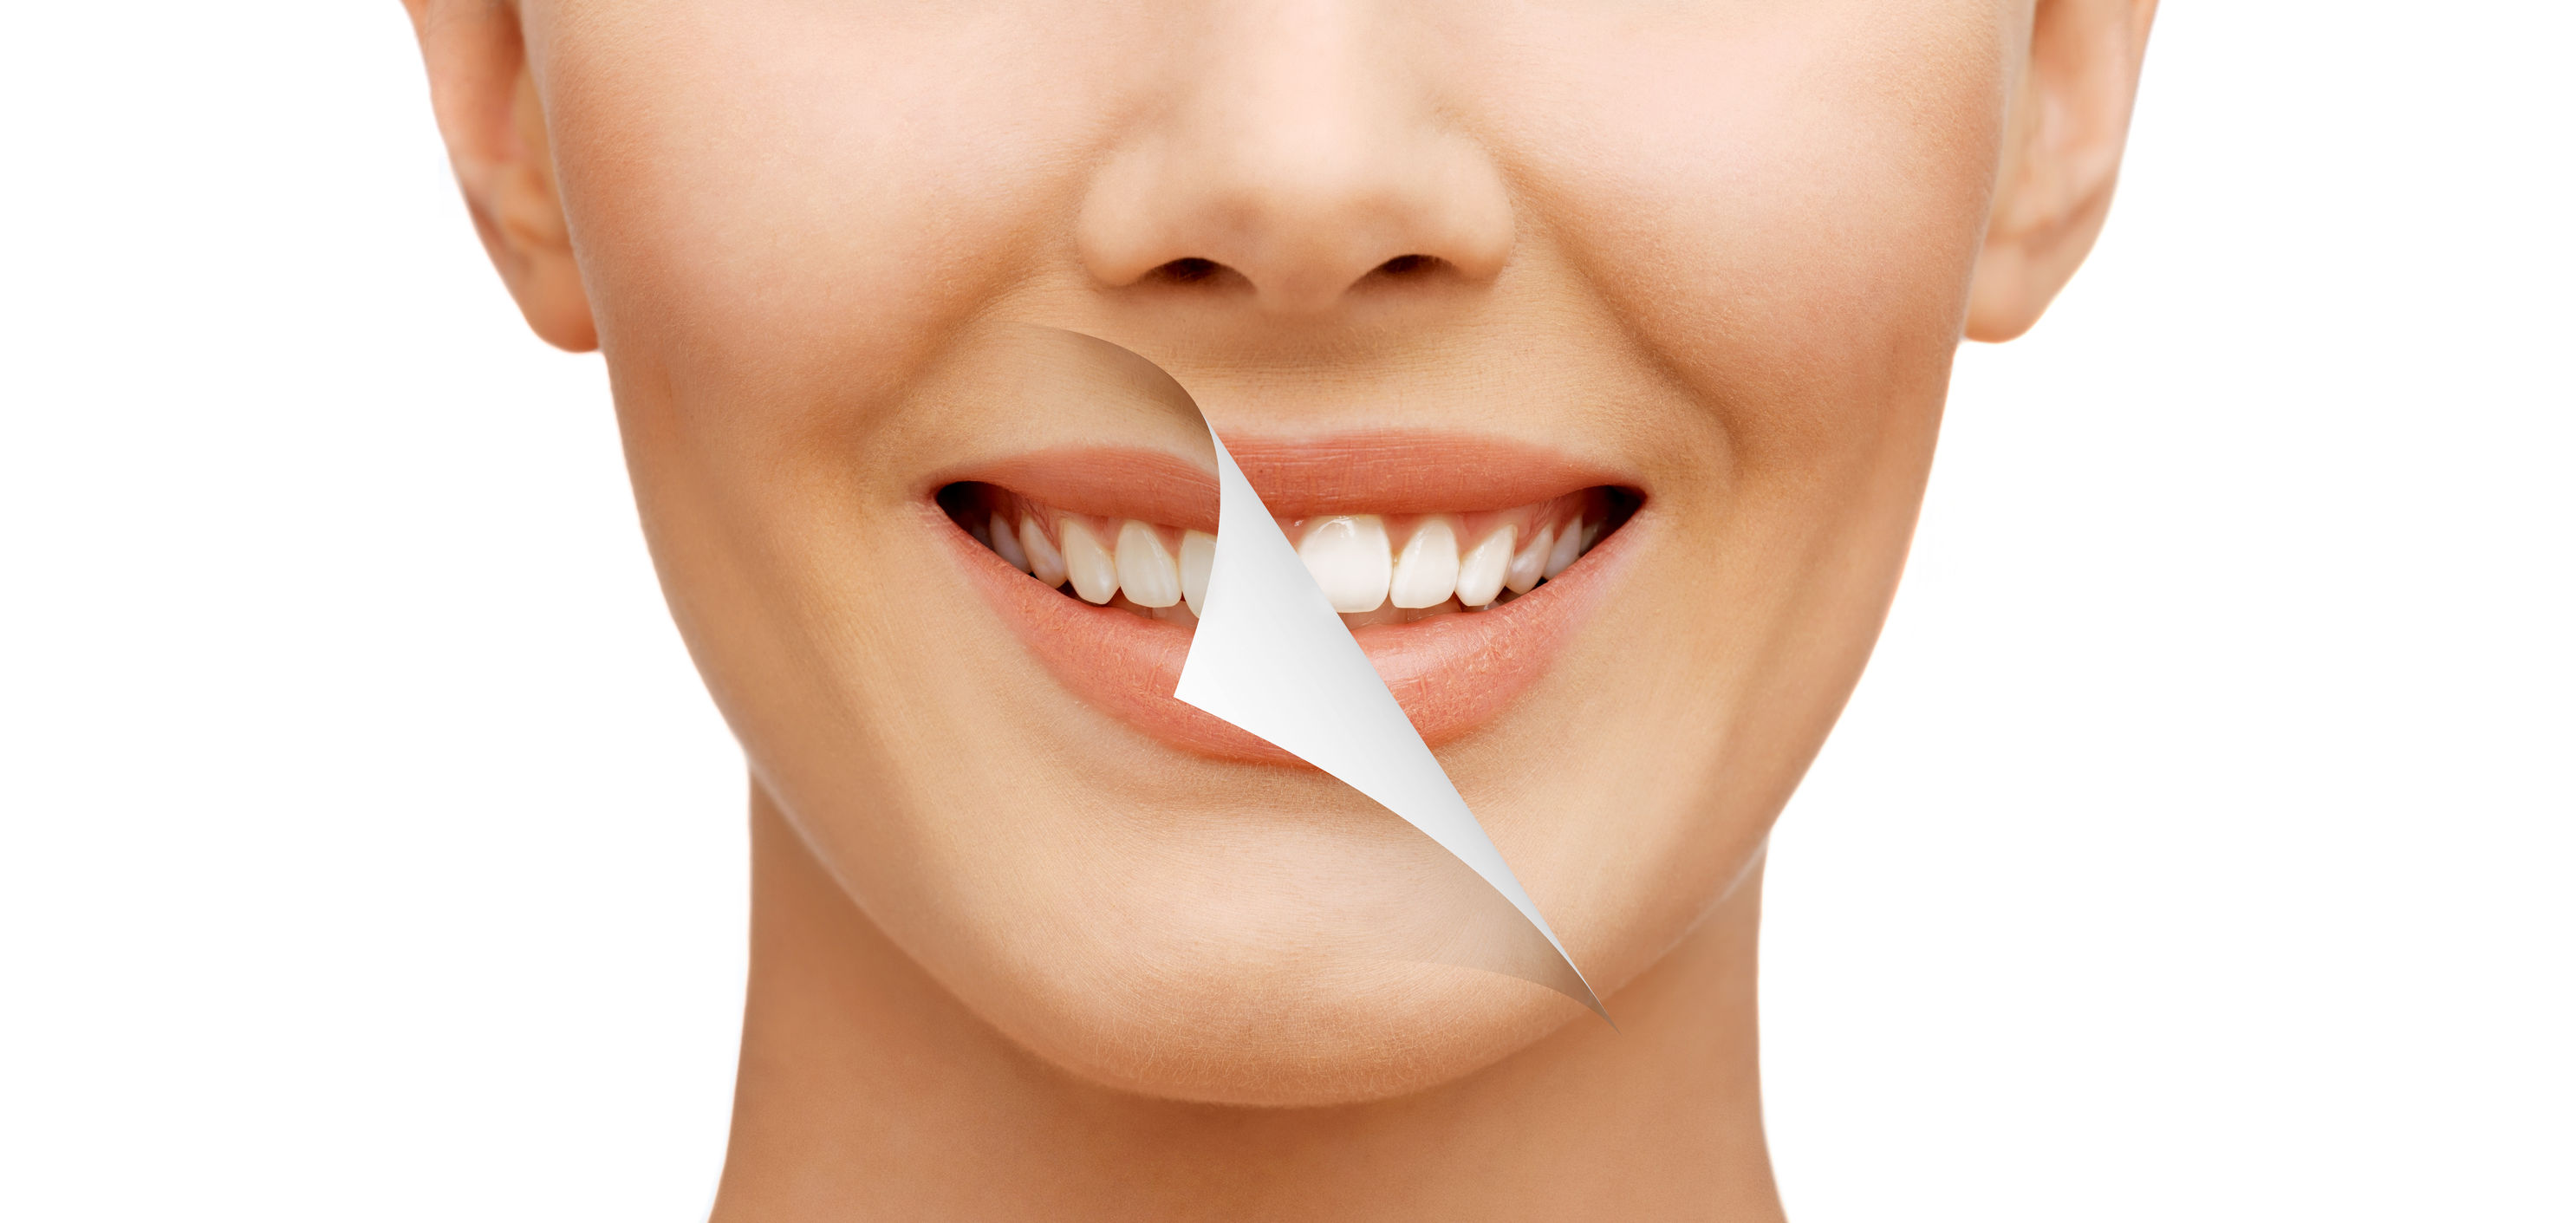 Where Can I Find A Cosmetic Dentist In Hilliard?